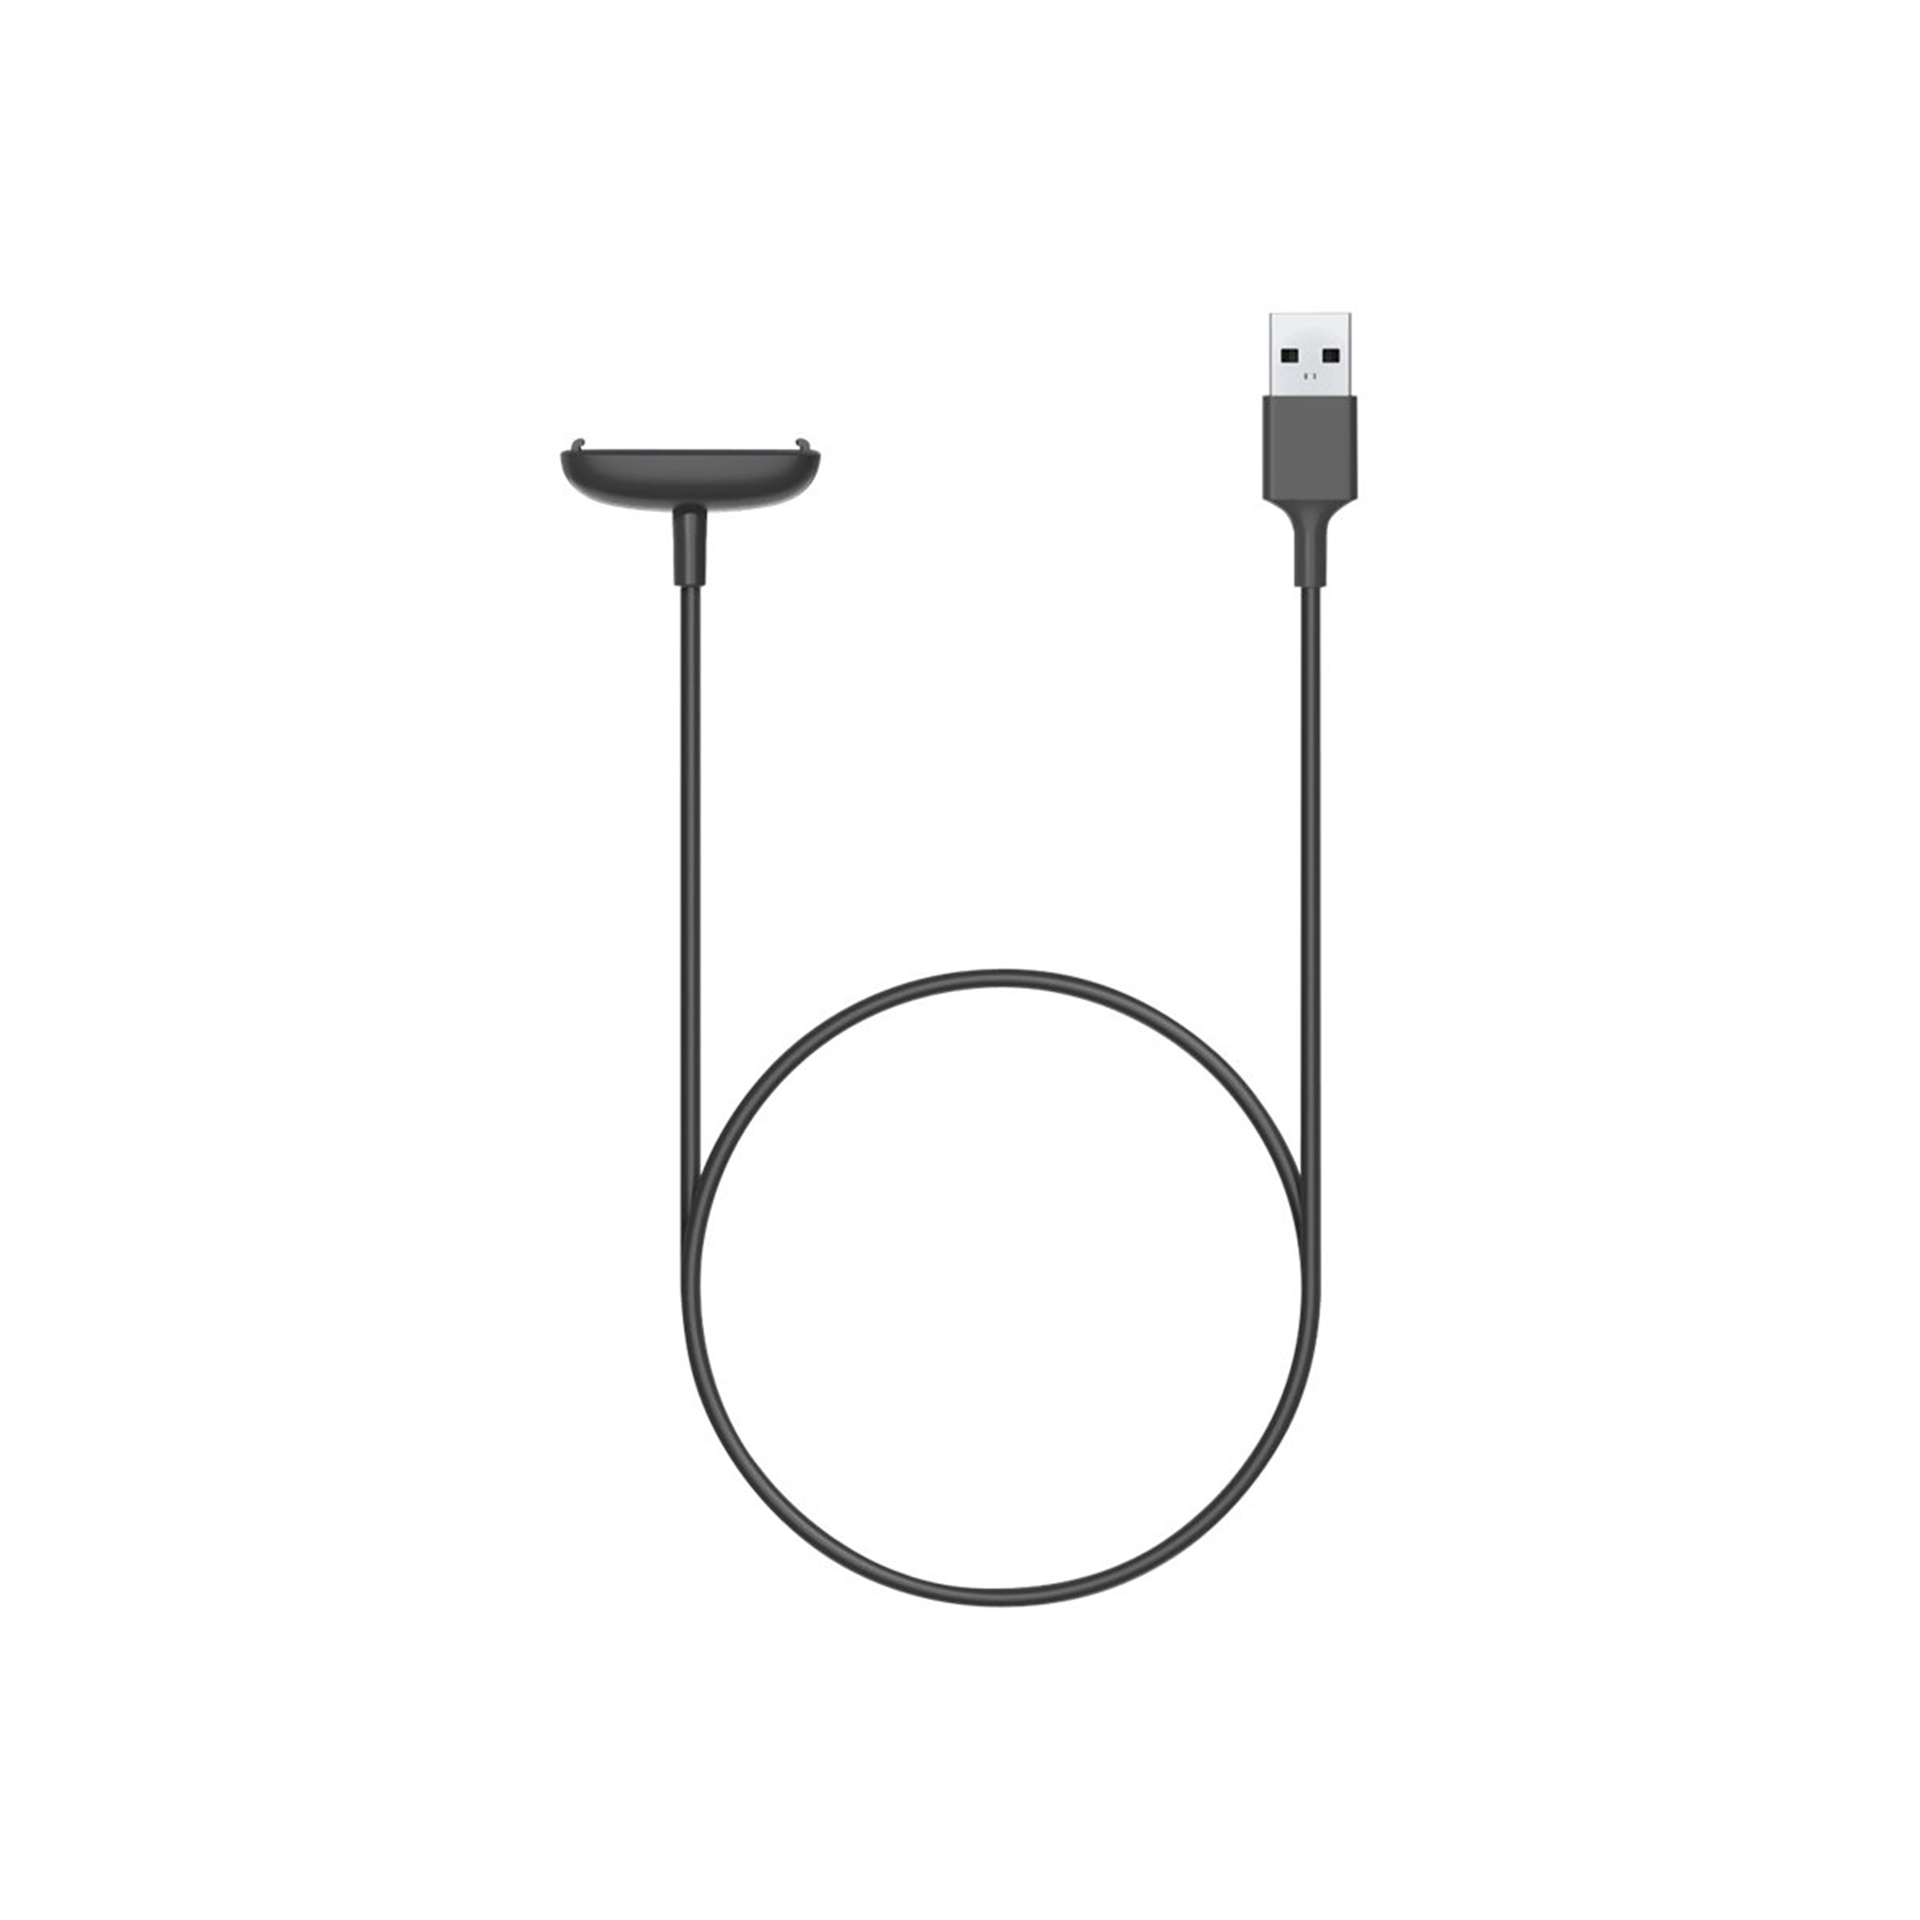 Fitbit accessory for Inspire 2 - Charging Cable Fitbit Charging Cable 40 cm